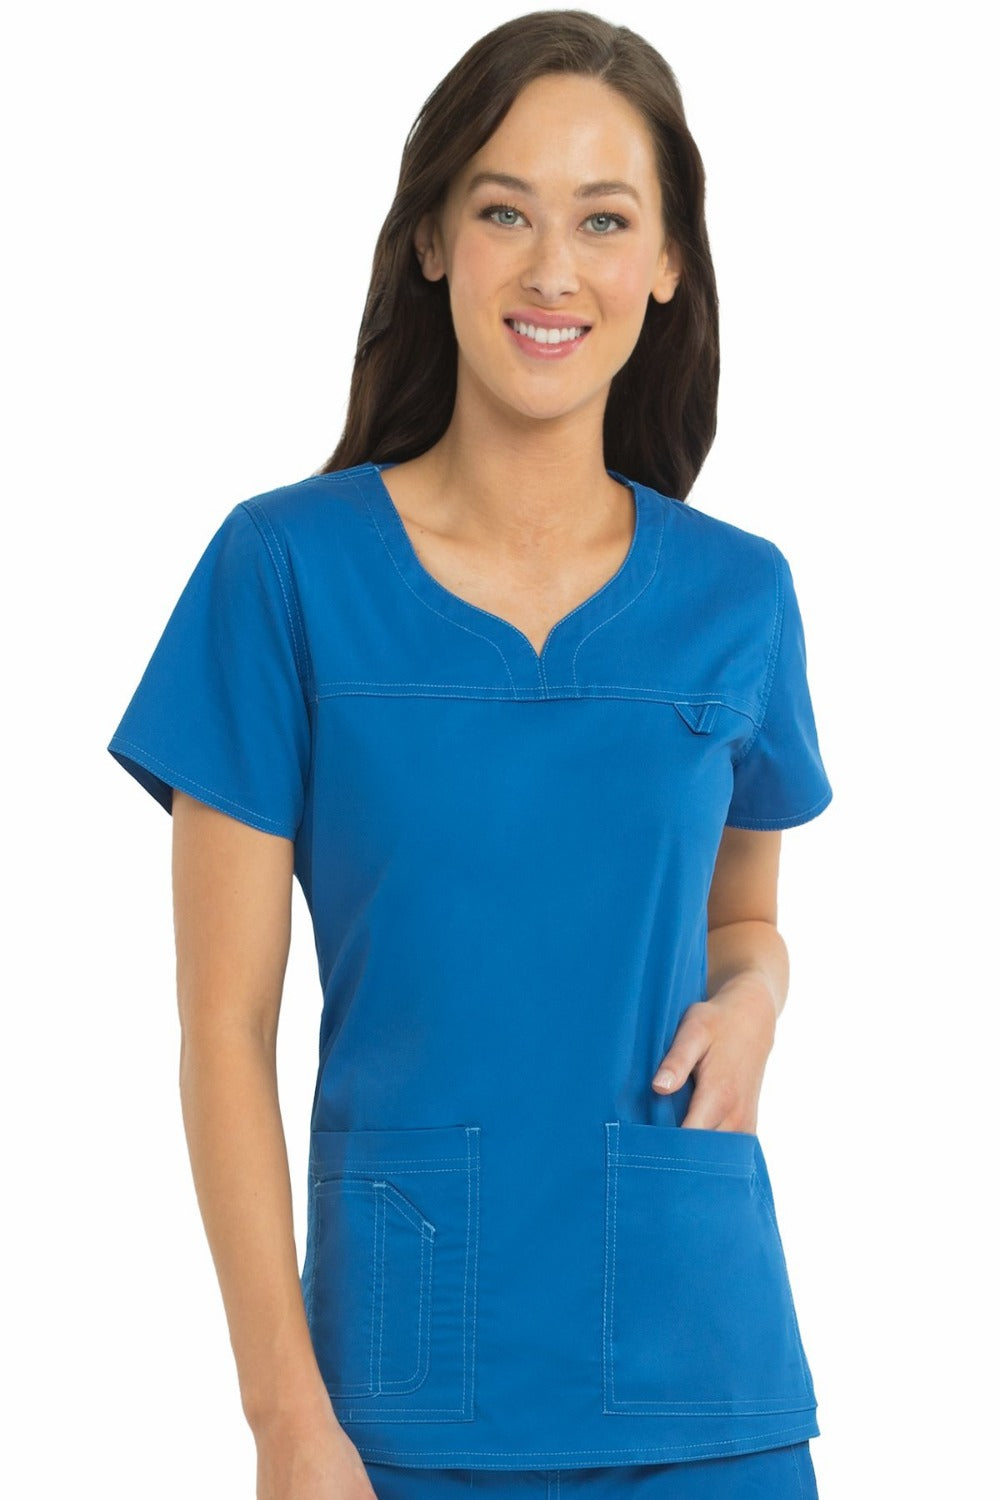 Med Couture Scrub Top MC2 Lexi in Royal at Parker's Clothing and Shoes